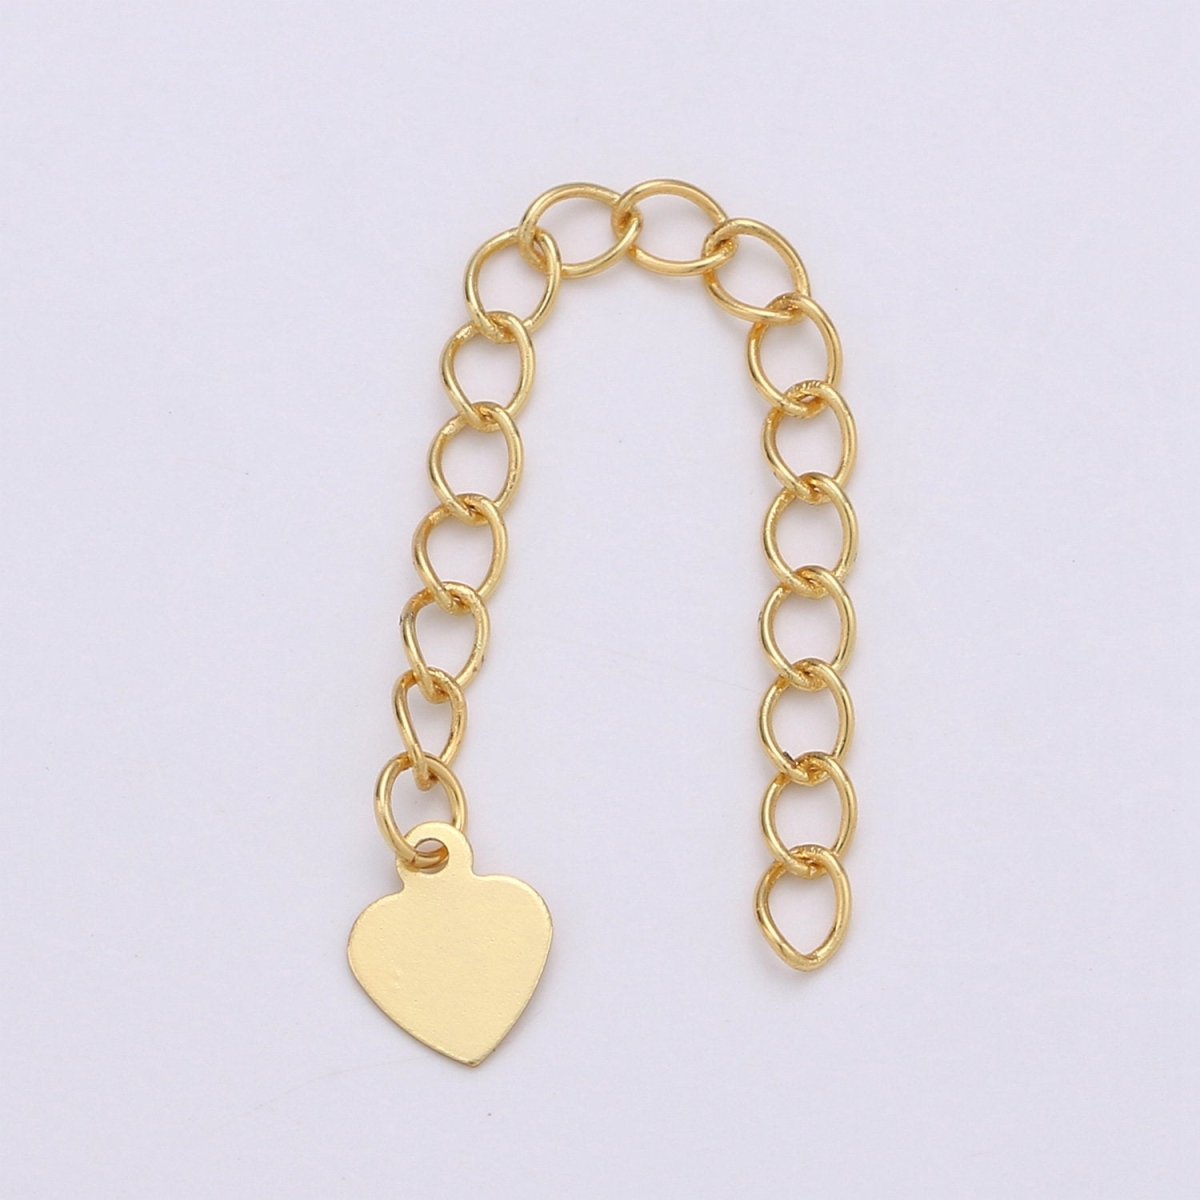 Overstock 24K Gold Filled Chain Extender For Necklace Bracelet Component Supply Findings Extenders with Heart charm K-624 - DLUXCA